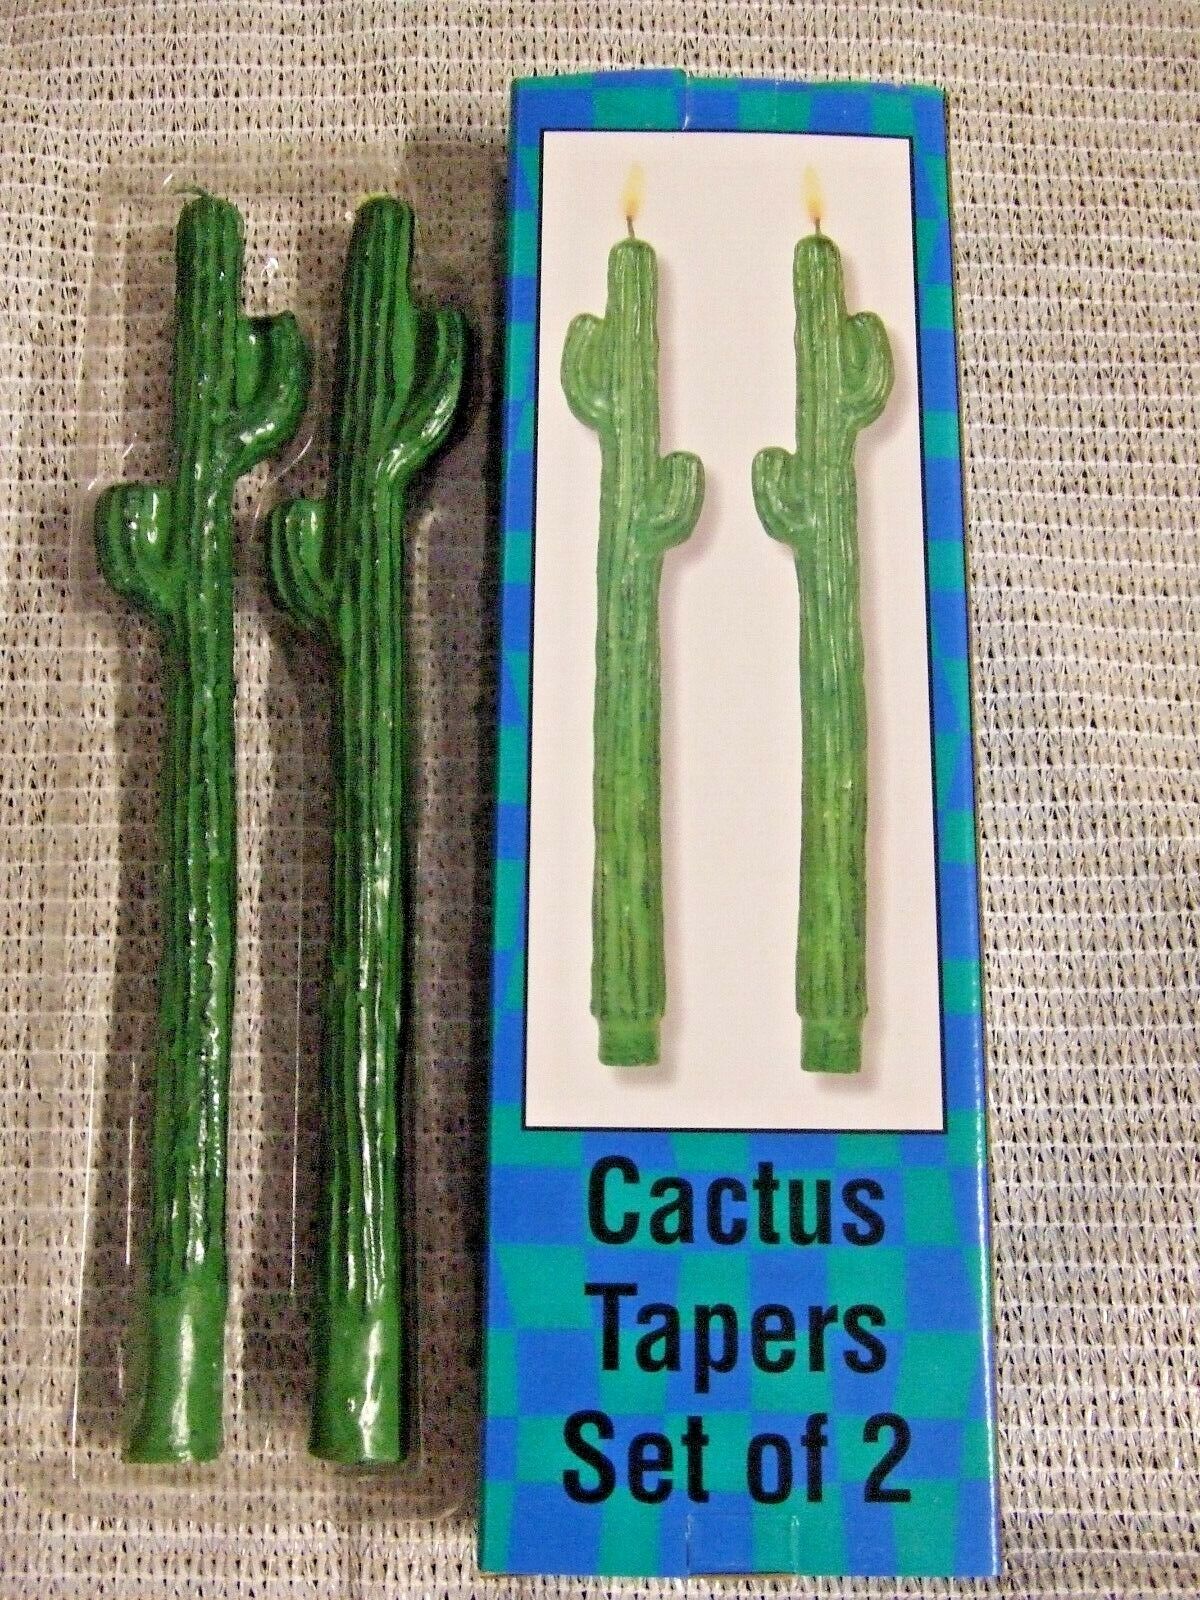 Unique Green Cactus Shape Taper Candlestick Candles Set of 2 Measure 10.5” High